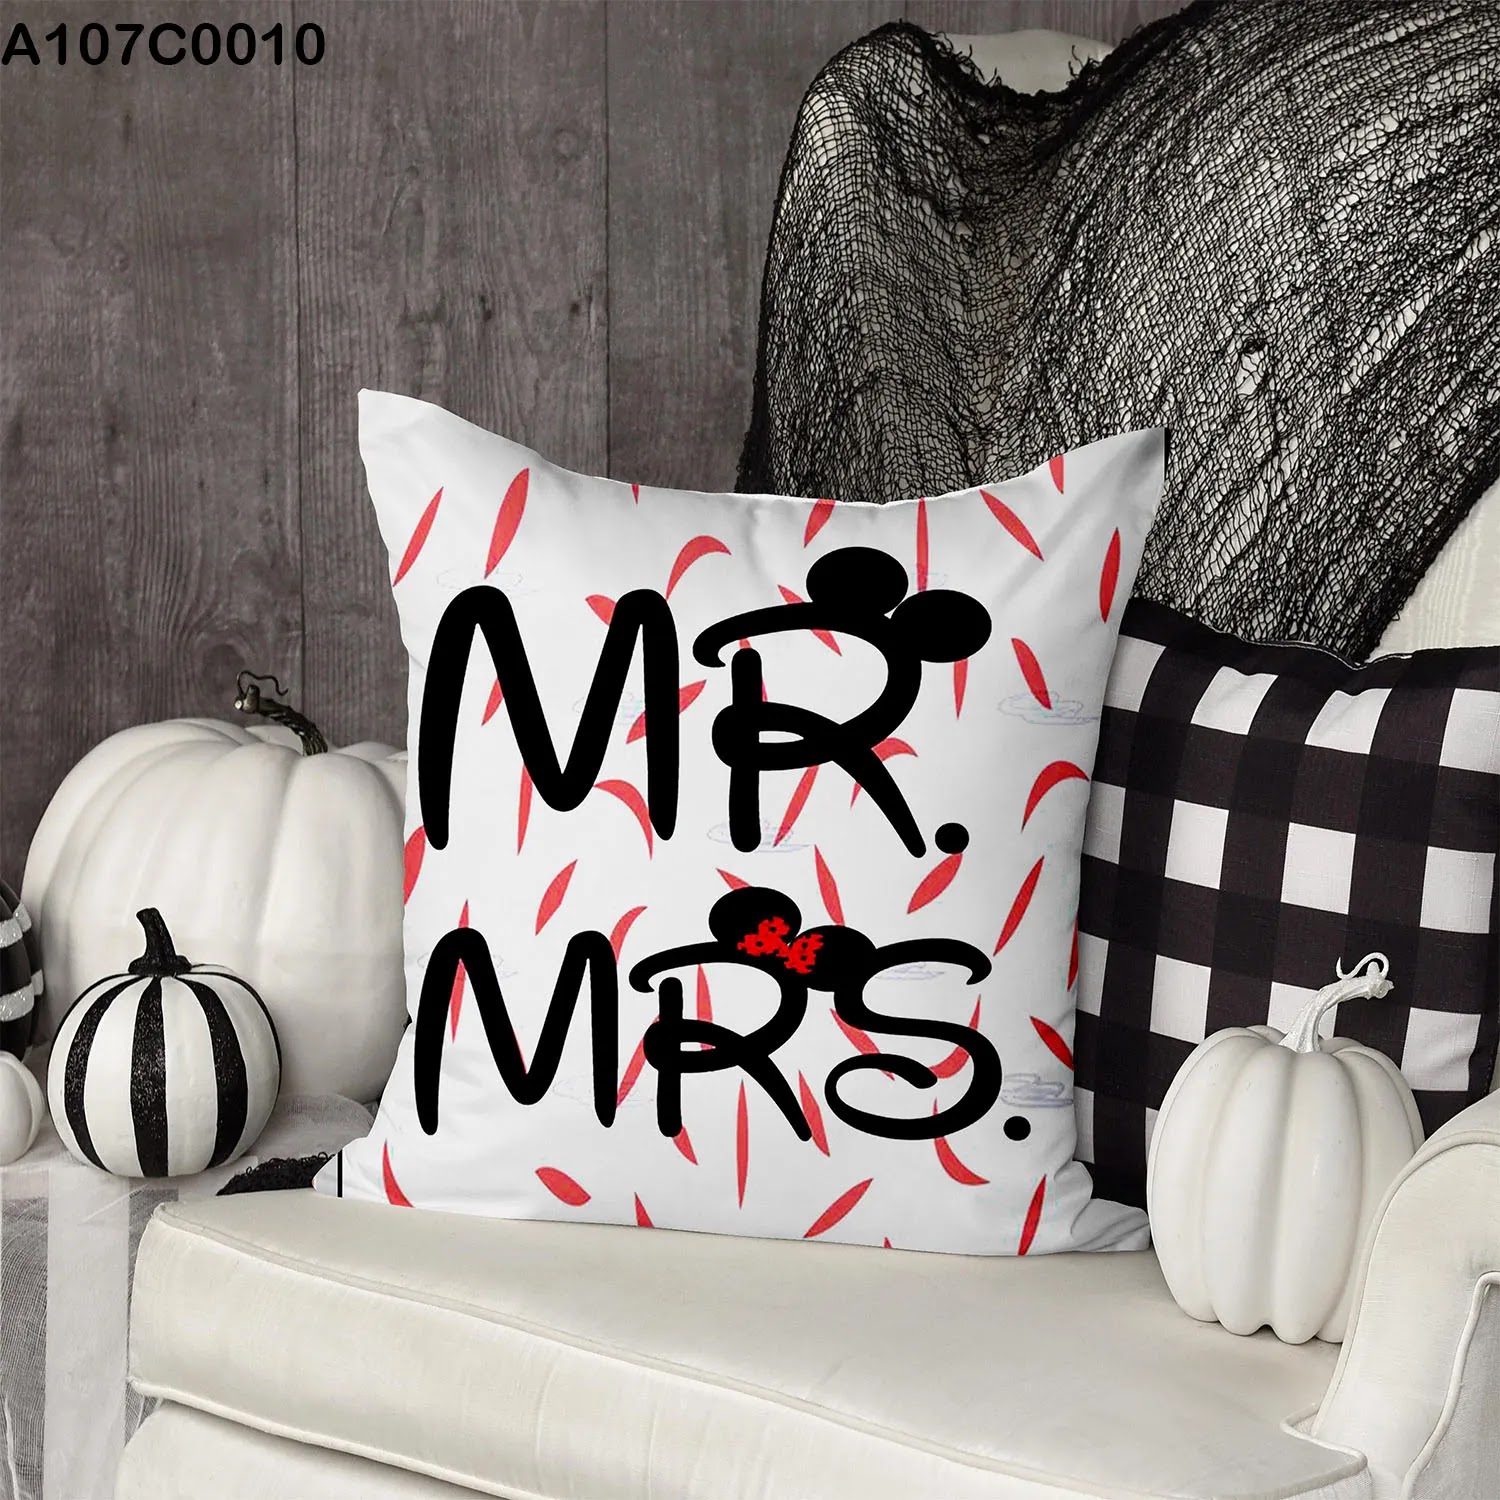 White pillow case with (MR & Mrs) written in black